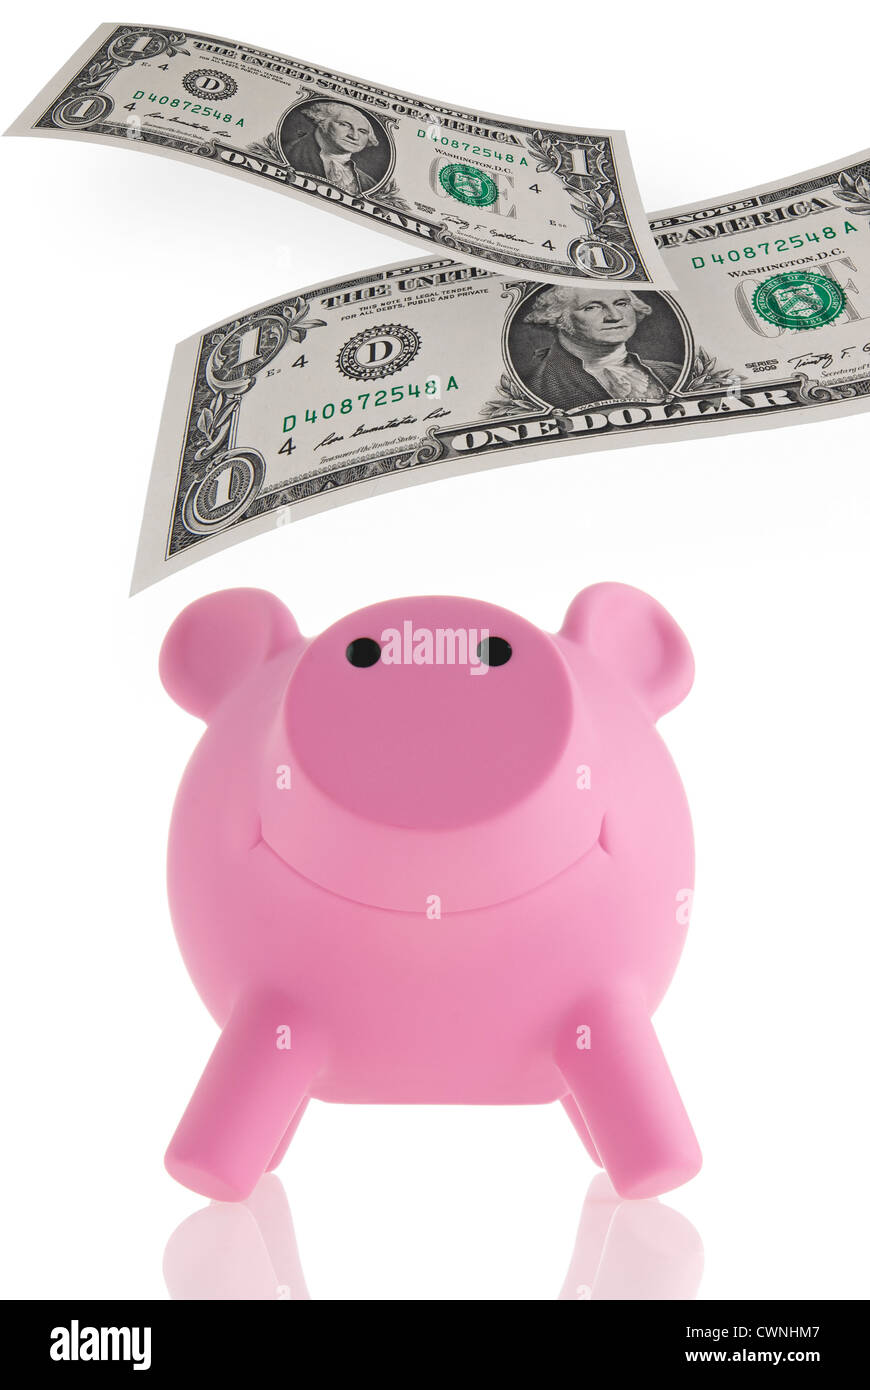 Pink piggy bank with floating banknotes, composing, isolated on 100% white background Stock Photo